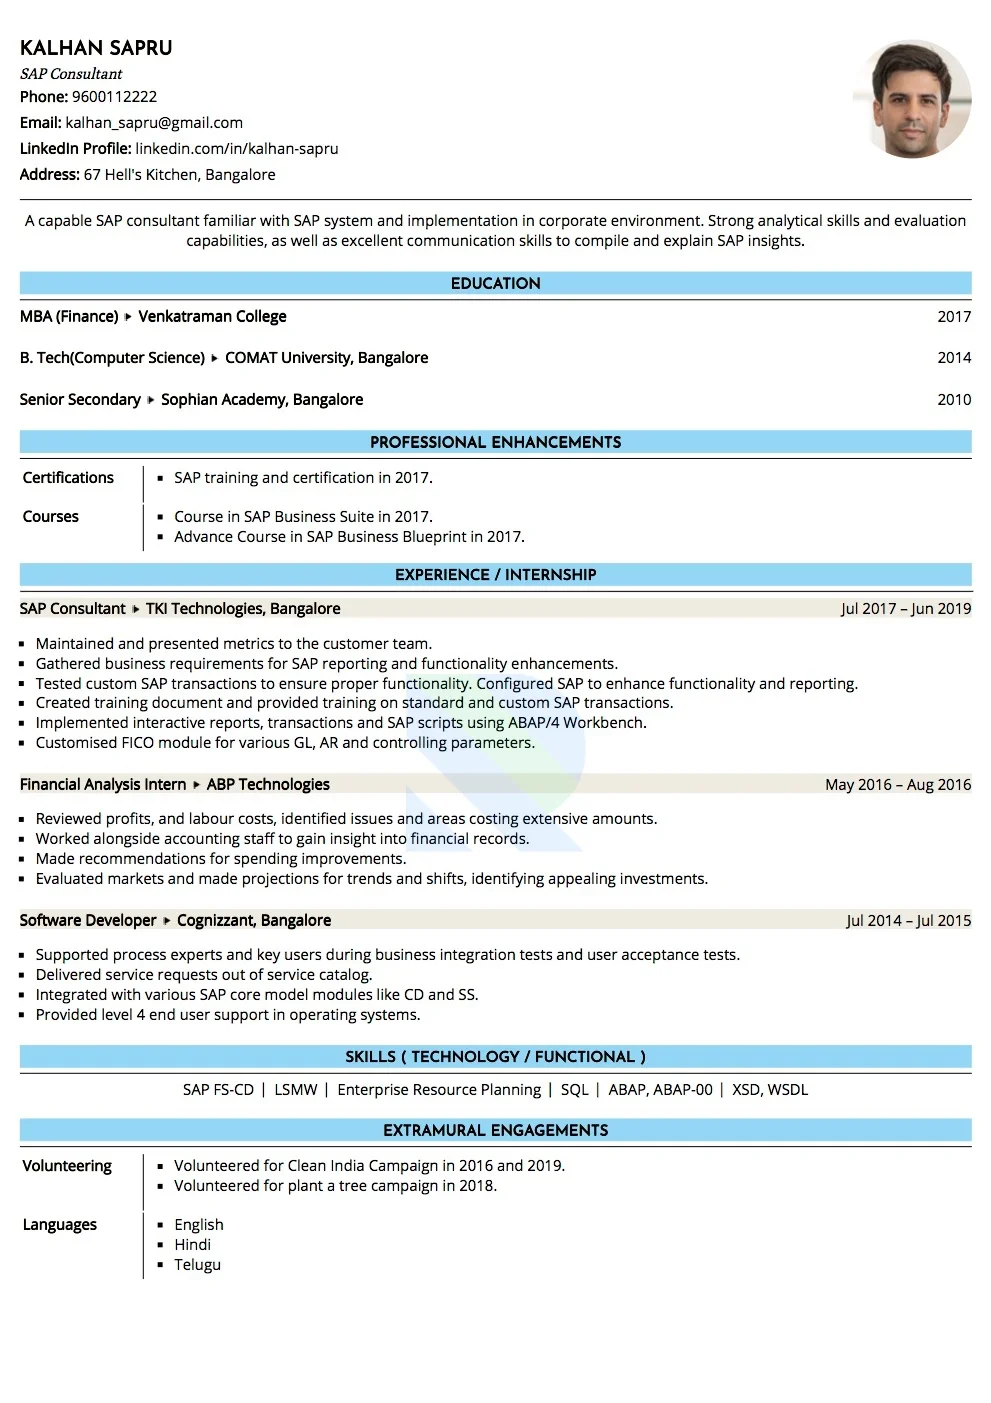 Sample Resume of SAP Consultant  | Free Resume Templates & Samples on Resumod.co